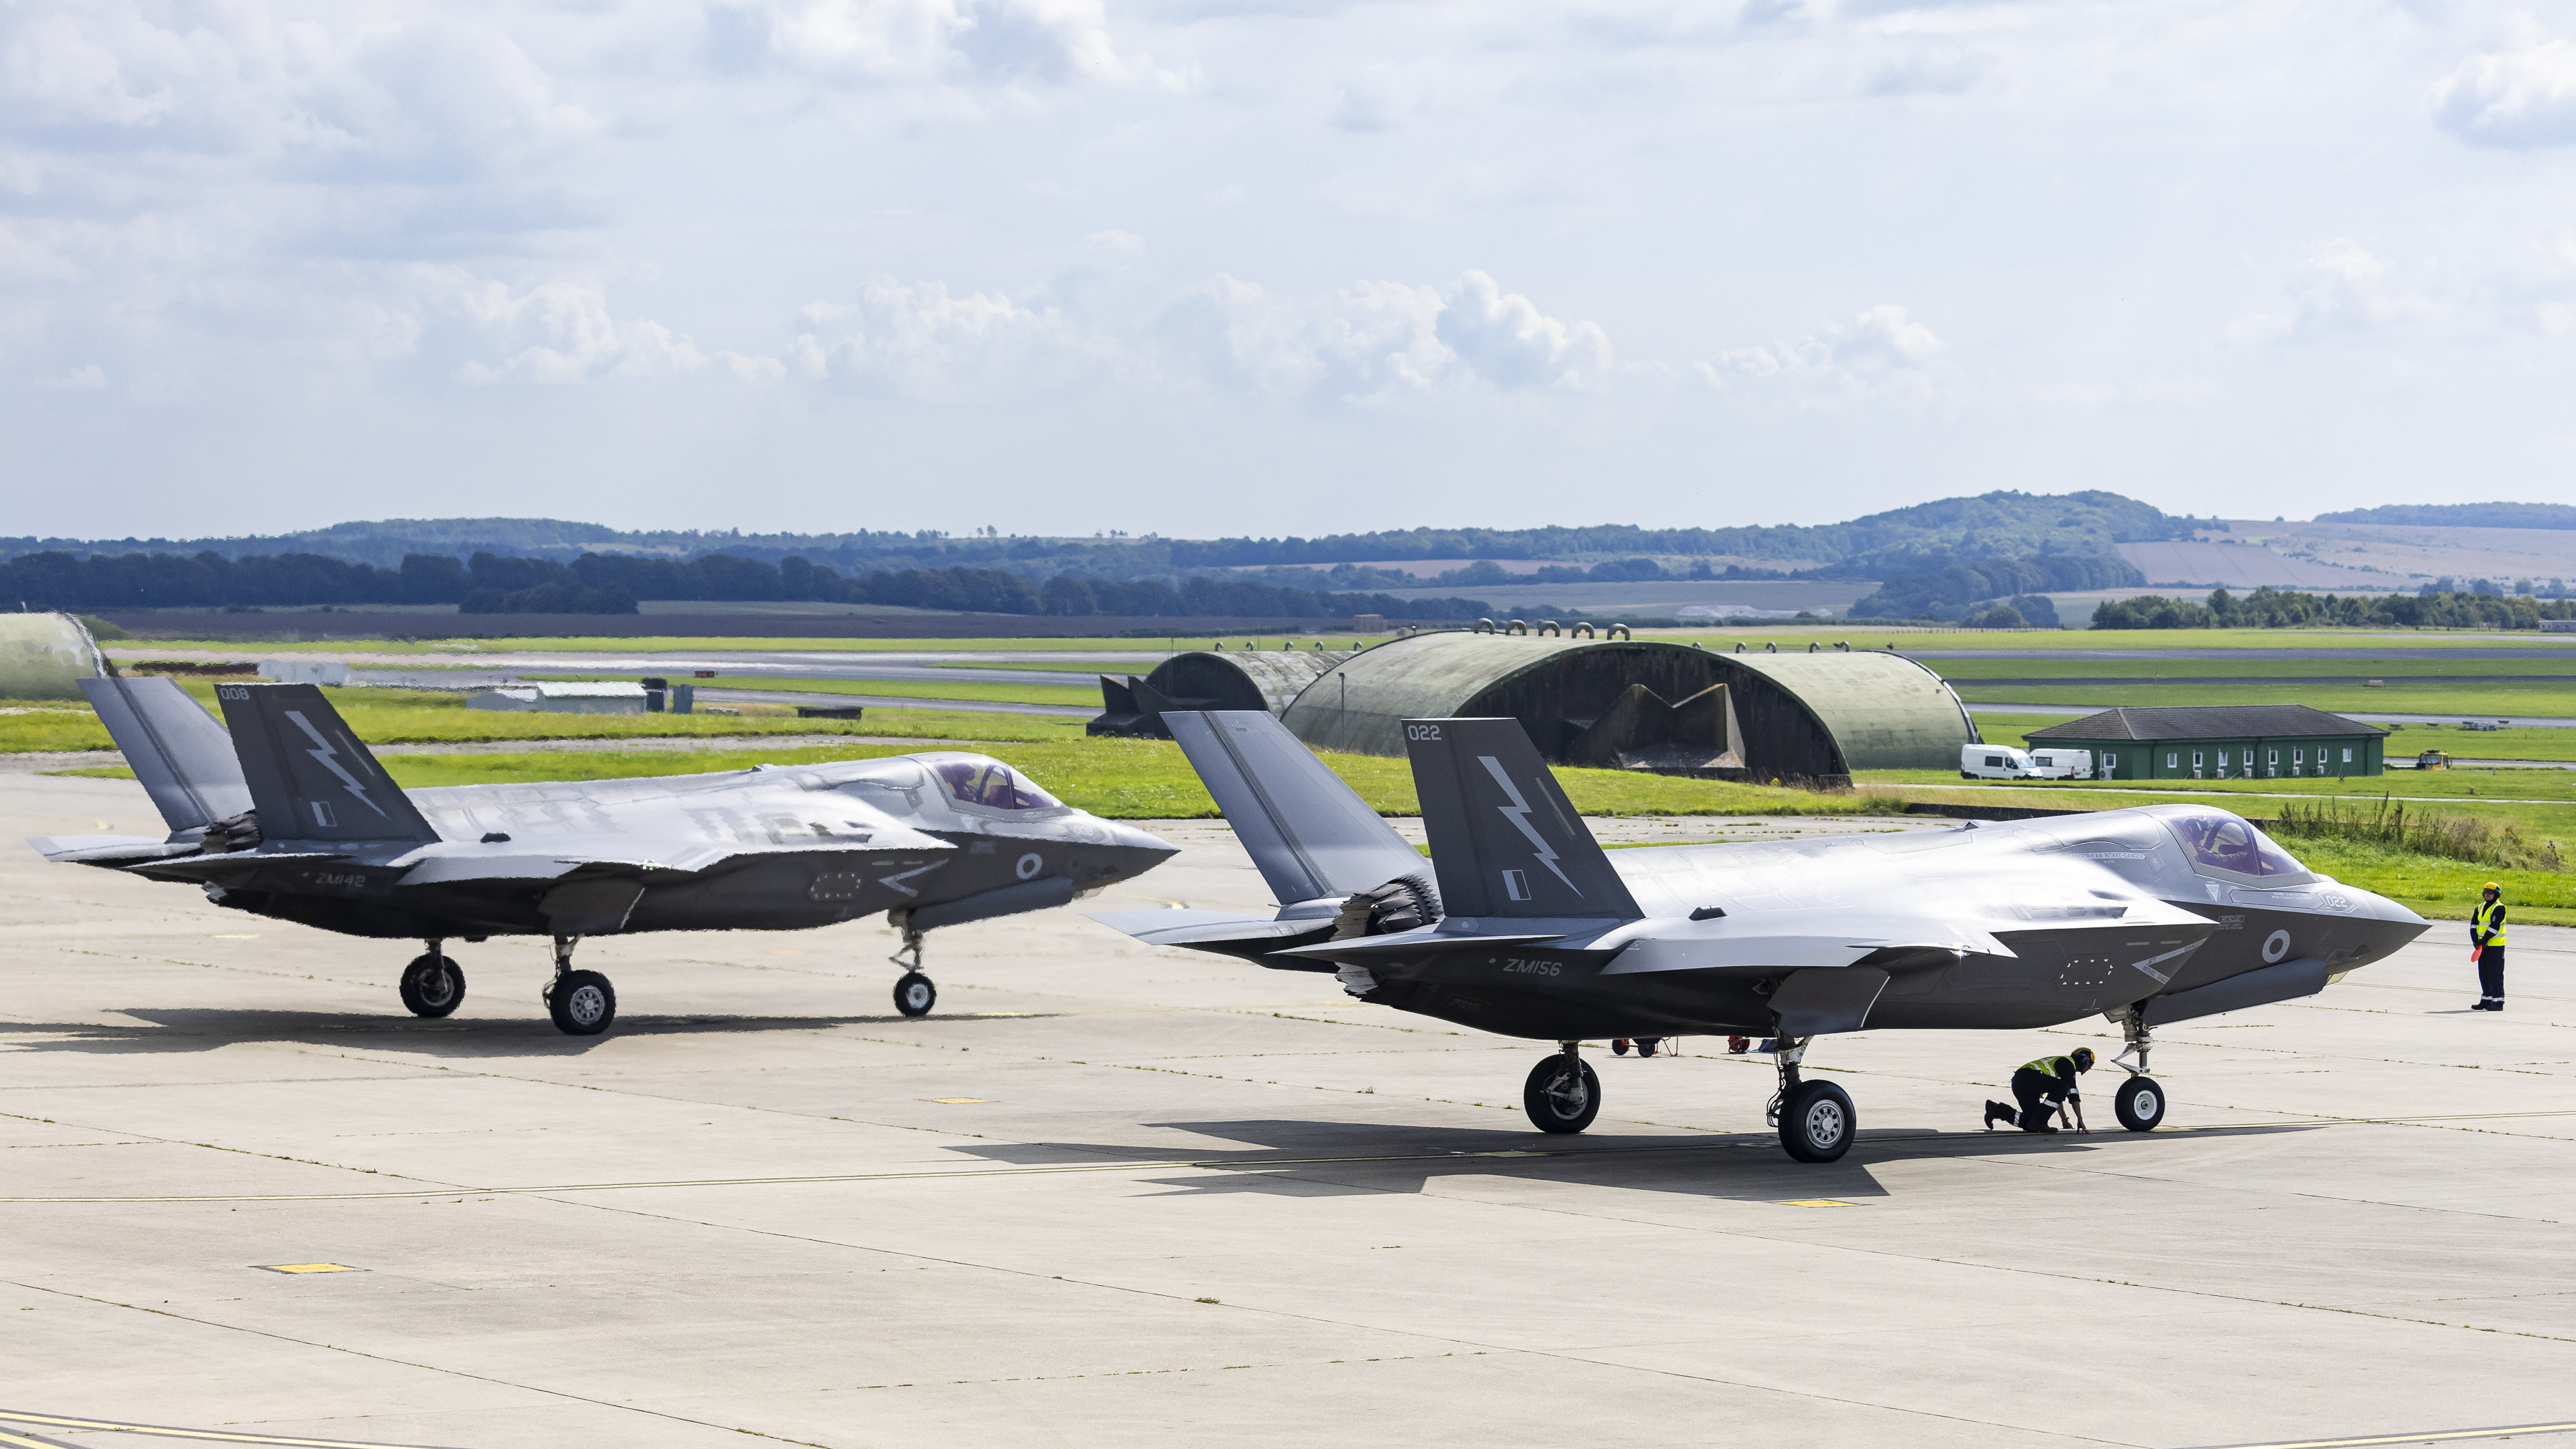 Image shows two RAF F-35 Lightning aircraft on the ground.